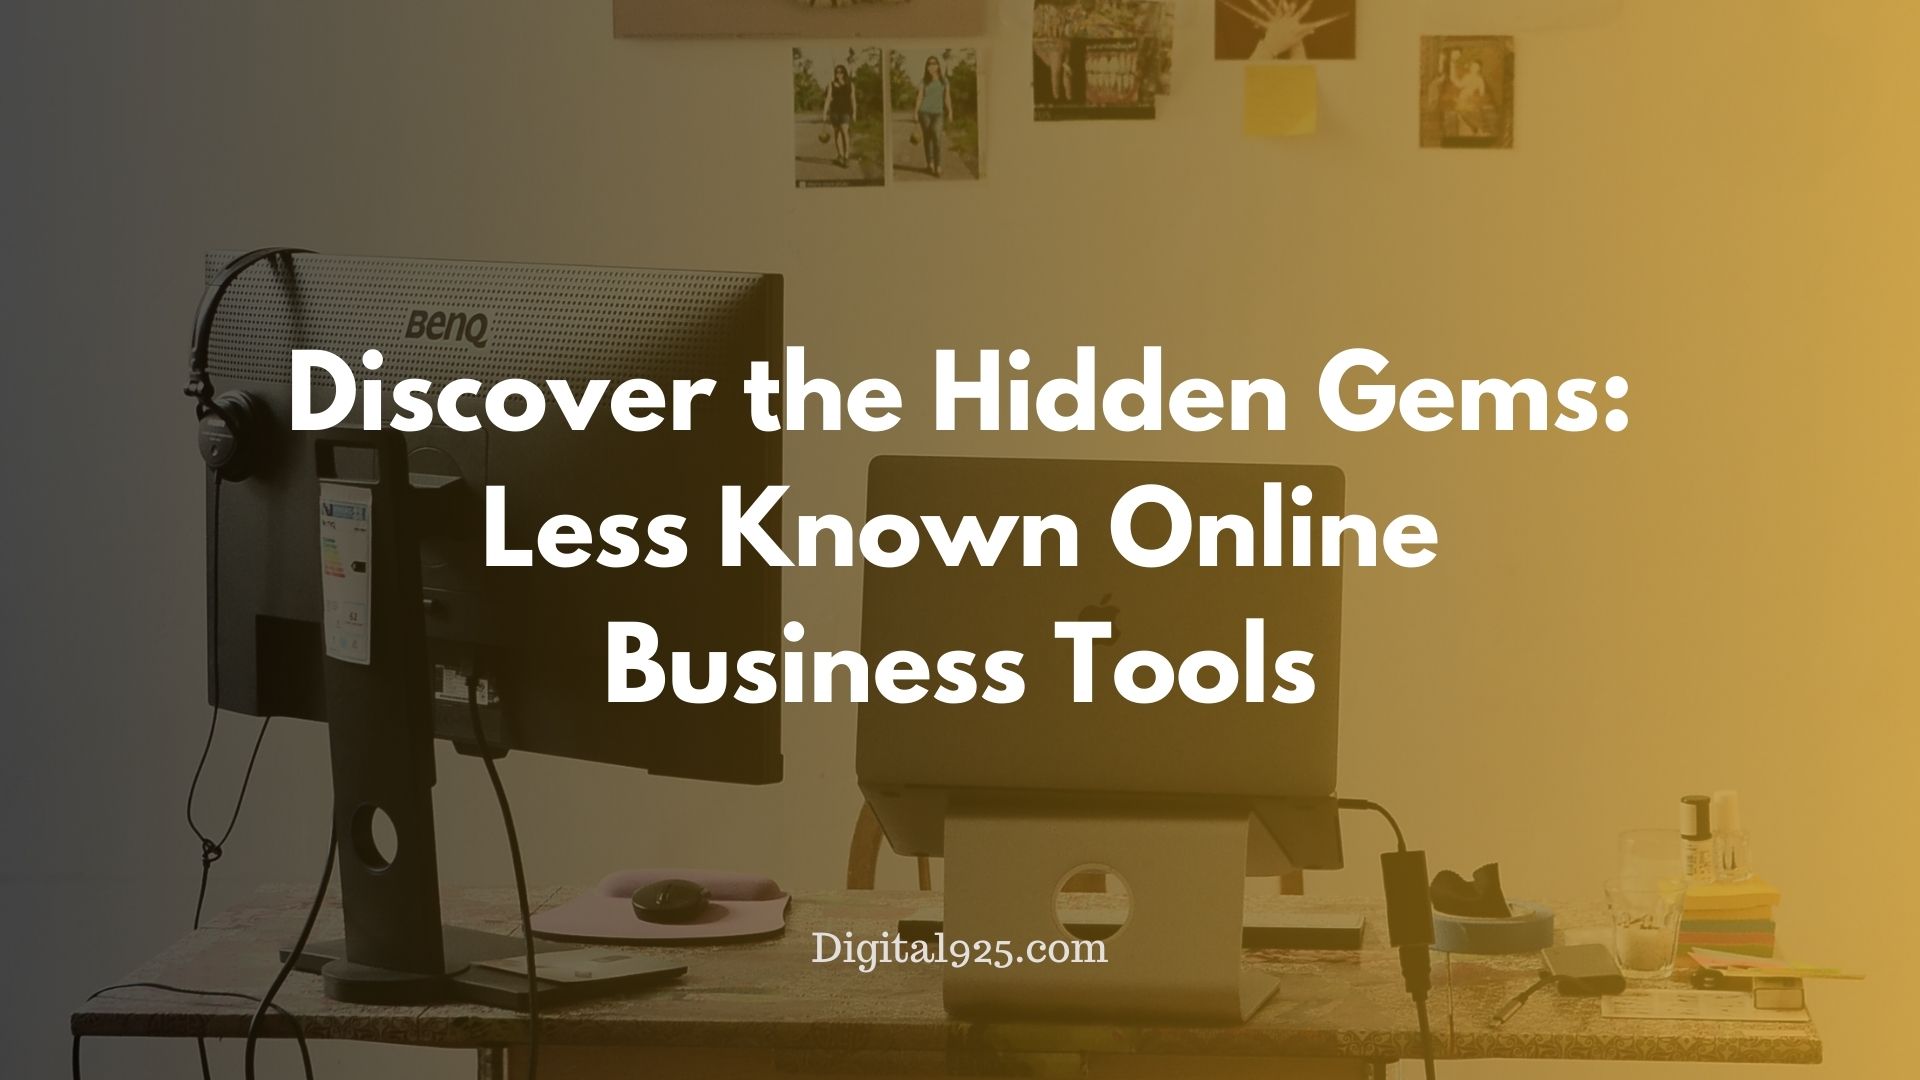 Discover the Hidden Gems: Less Known Online Business Tools